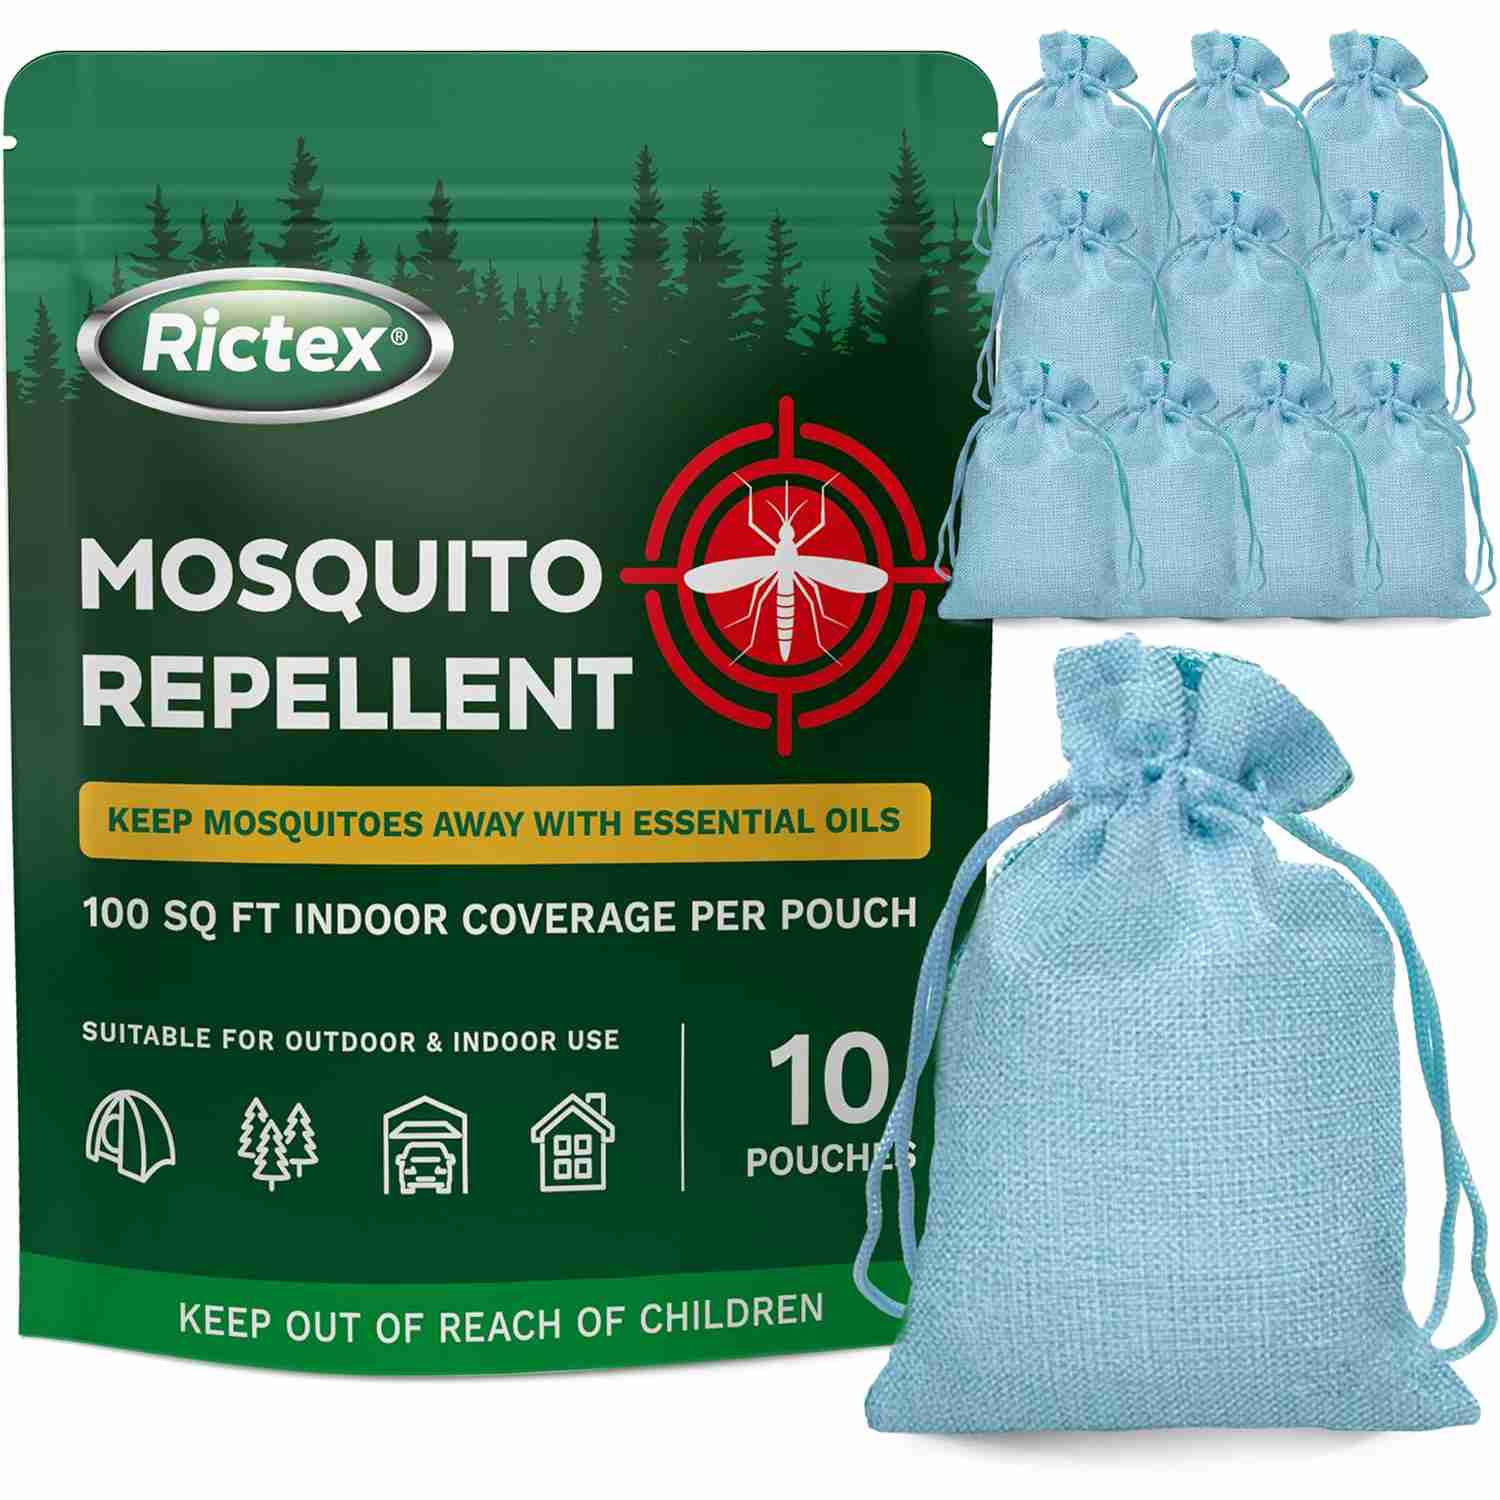 all-natural-mosquito-repellent with cash back rebate